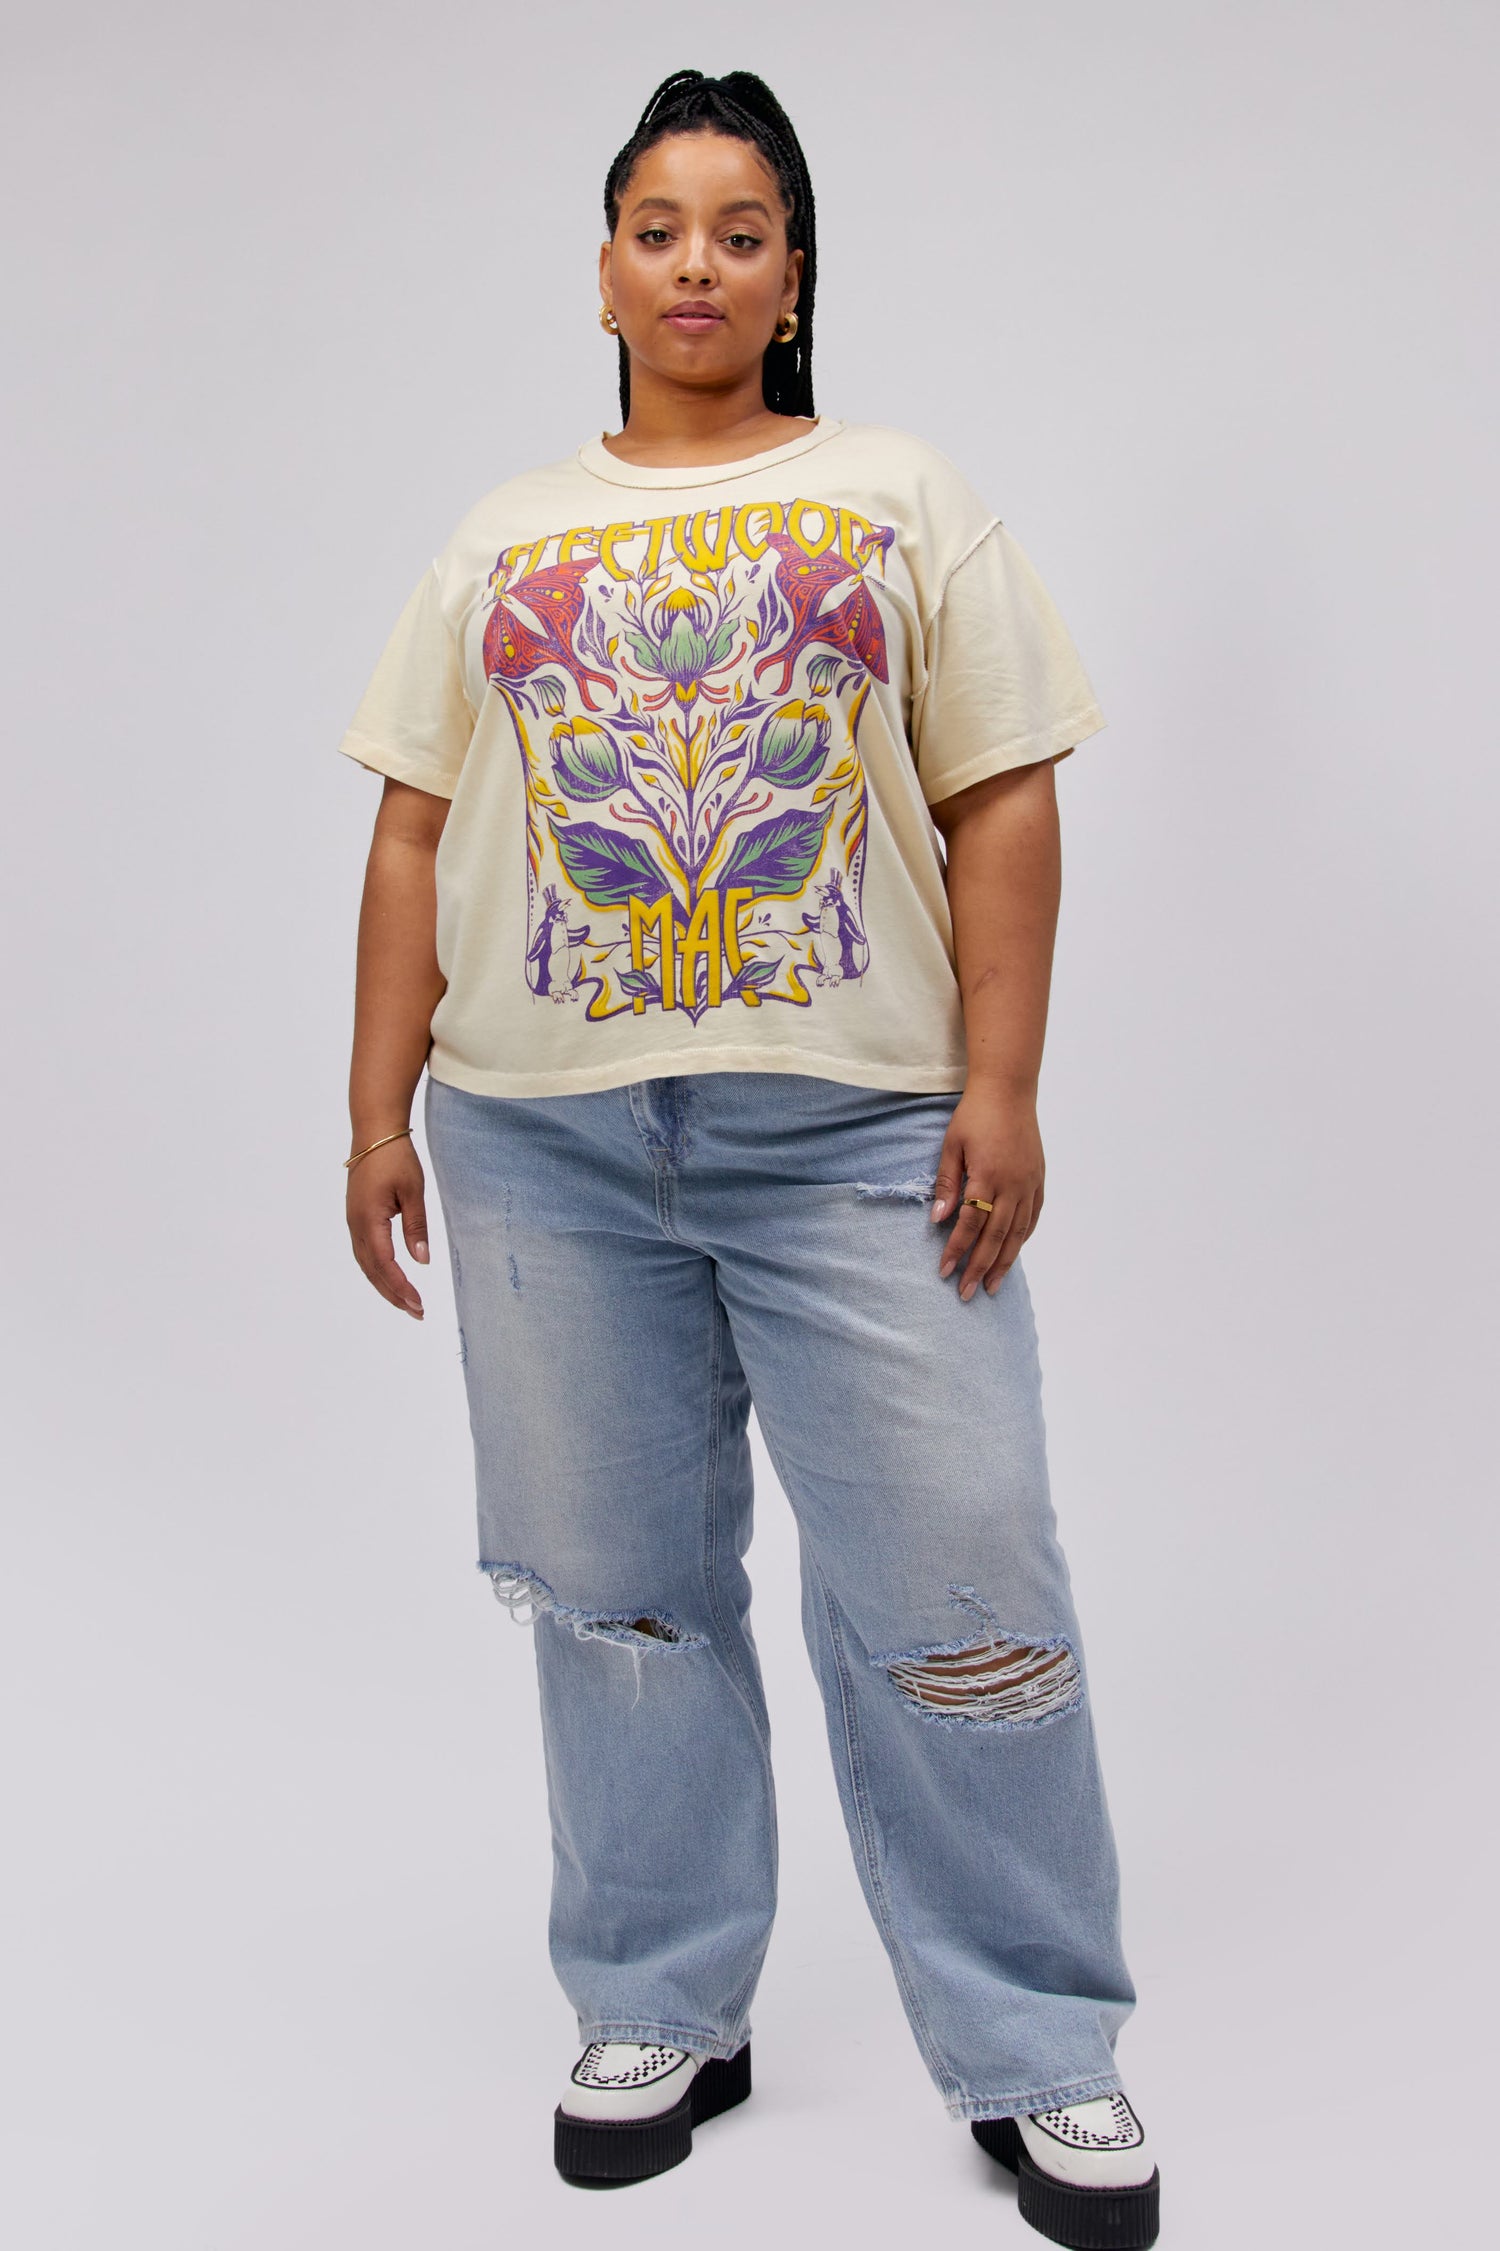 Plus size model wearing an off white Fleetwood Mac graphic tee with butterfly artwork and reverse seam details.